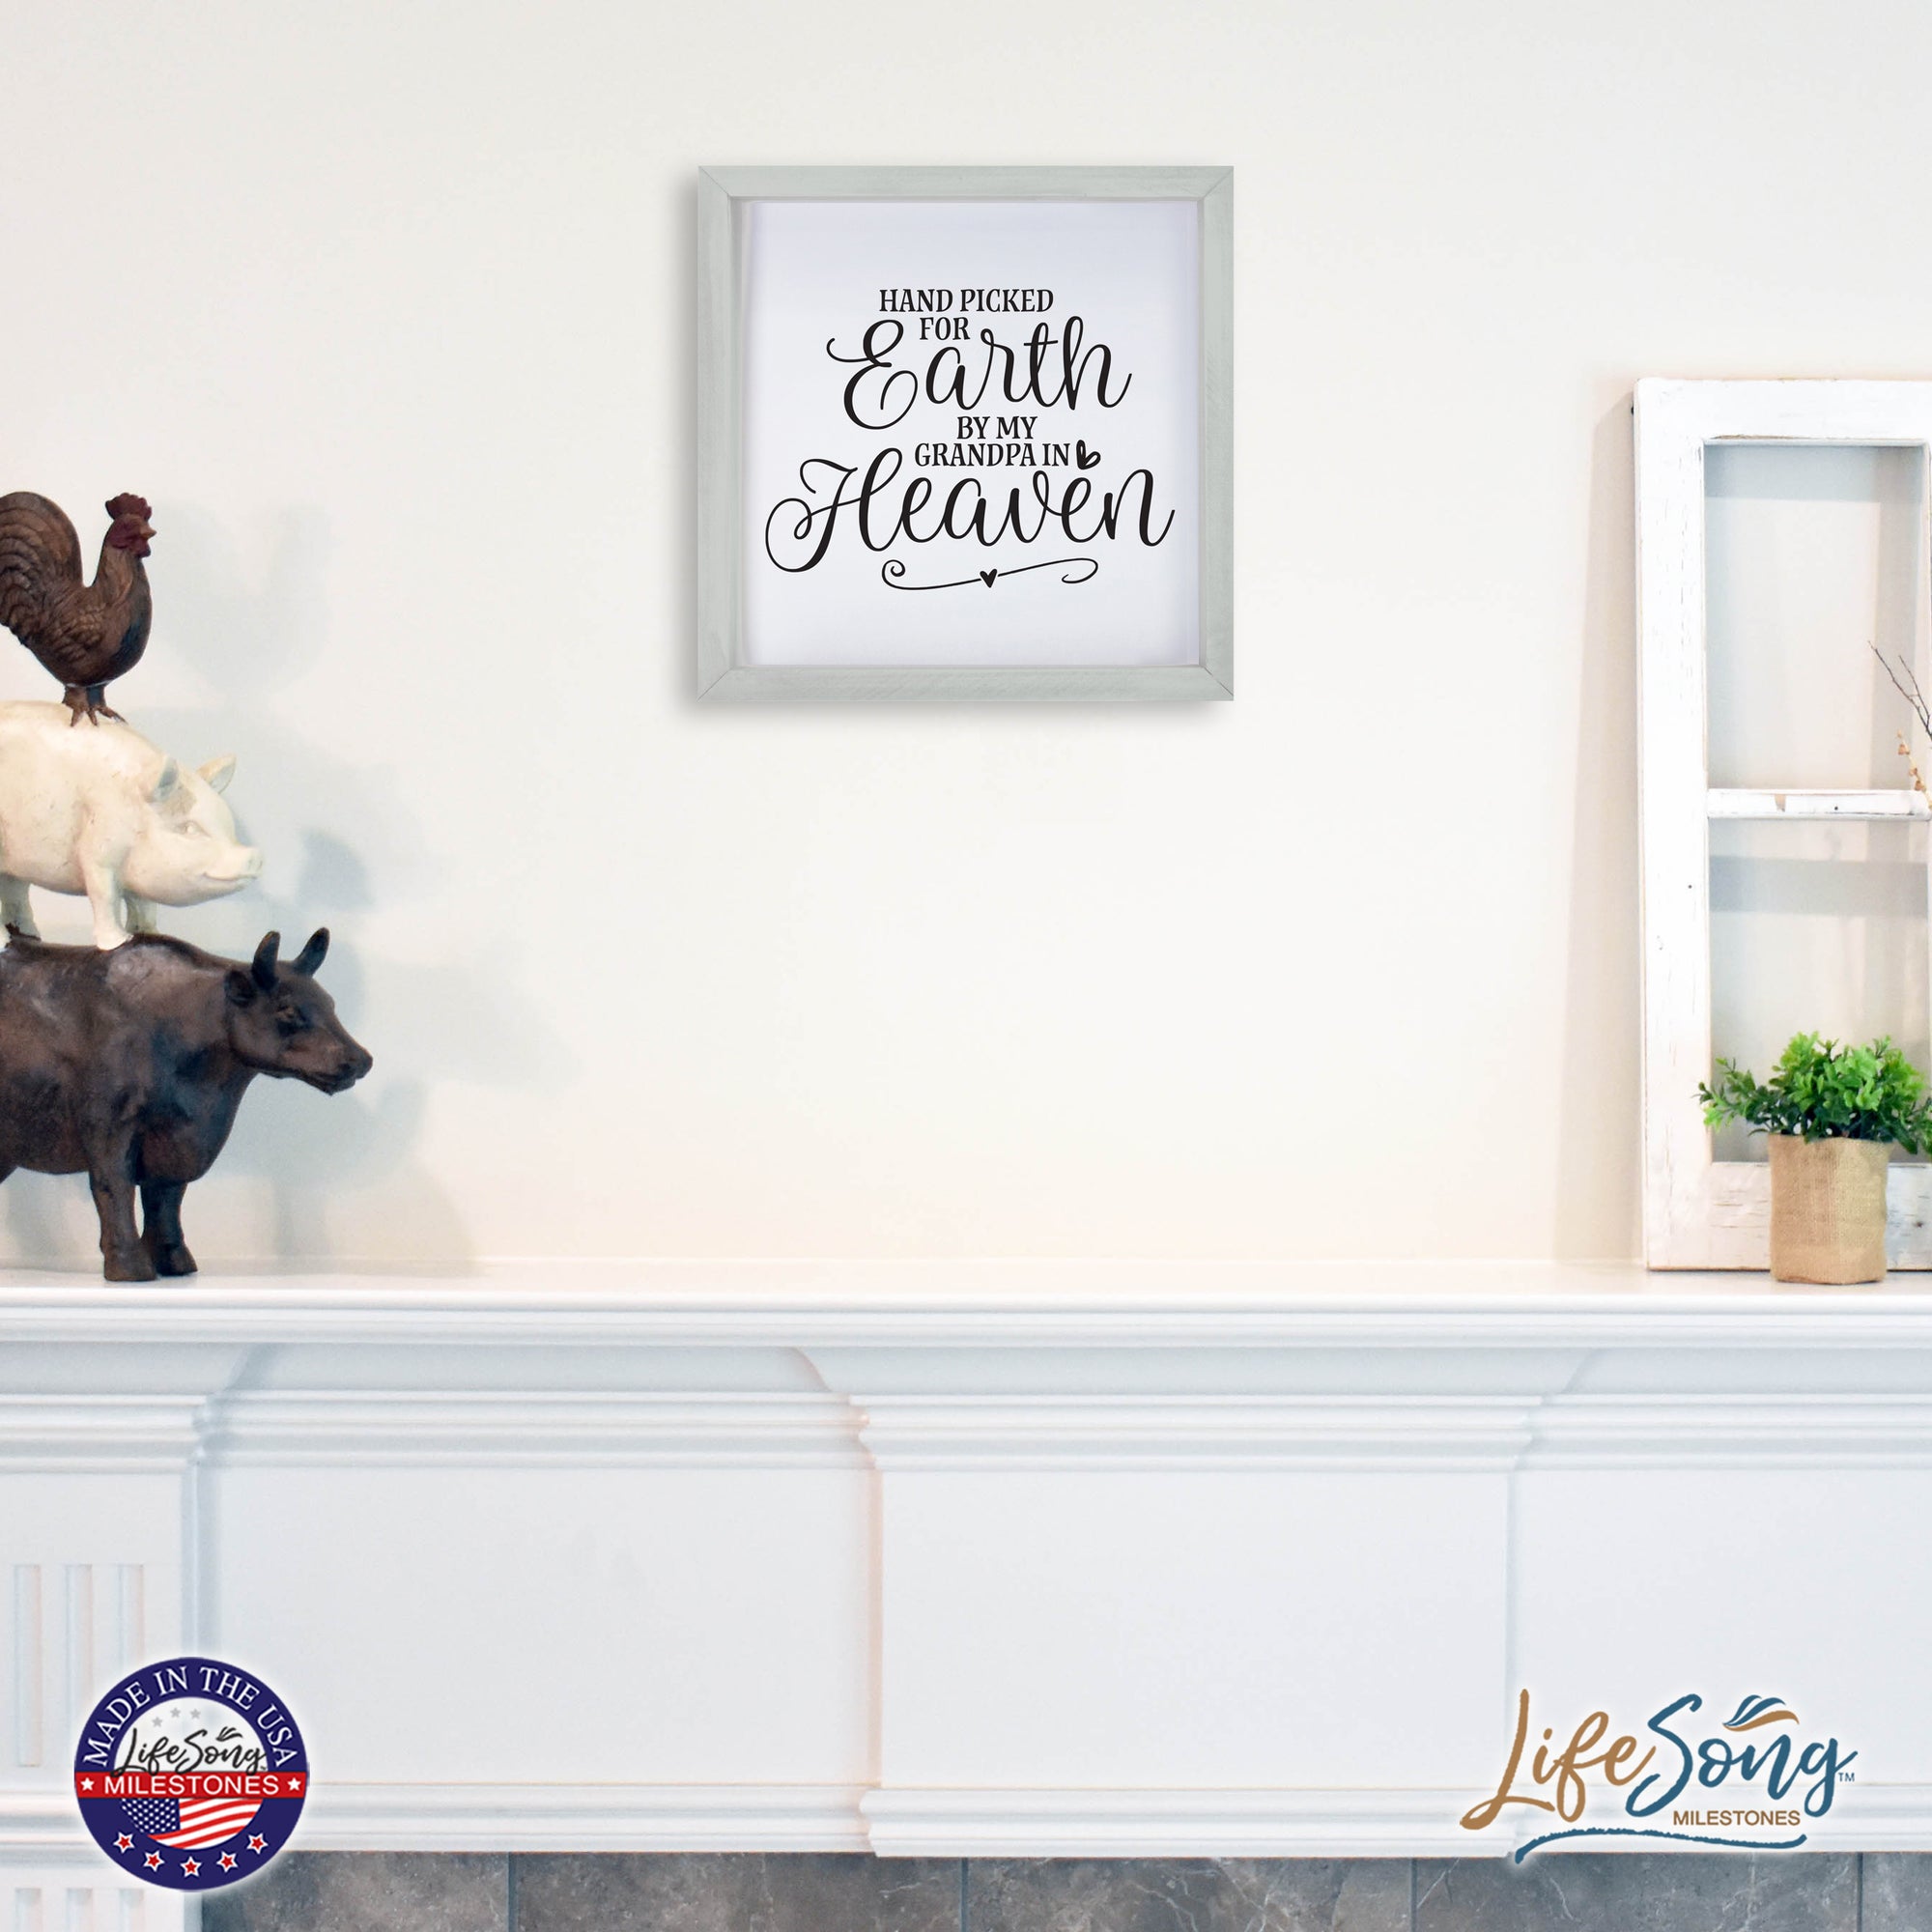 LifeSong Milestones Inspiring Modern Framed Shadow Box 7x7in - Hand Picked For Earth By My Grandpa. Wall Decor Decorative Accents For Walls Ready to Hang for Home Living Room, Bedroom, Kitchen, Dining Room, and Entryways Decorations.